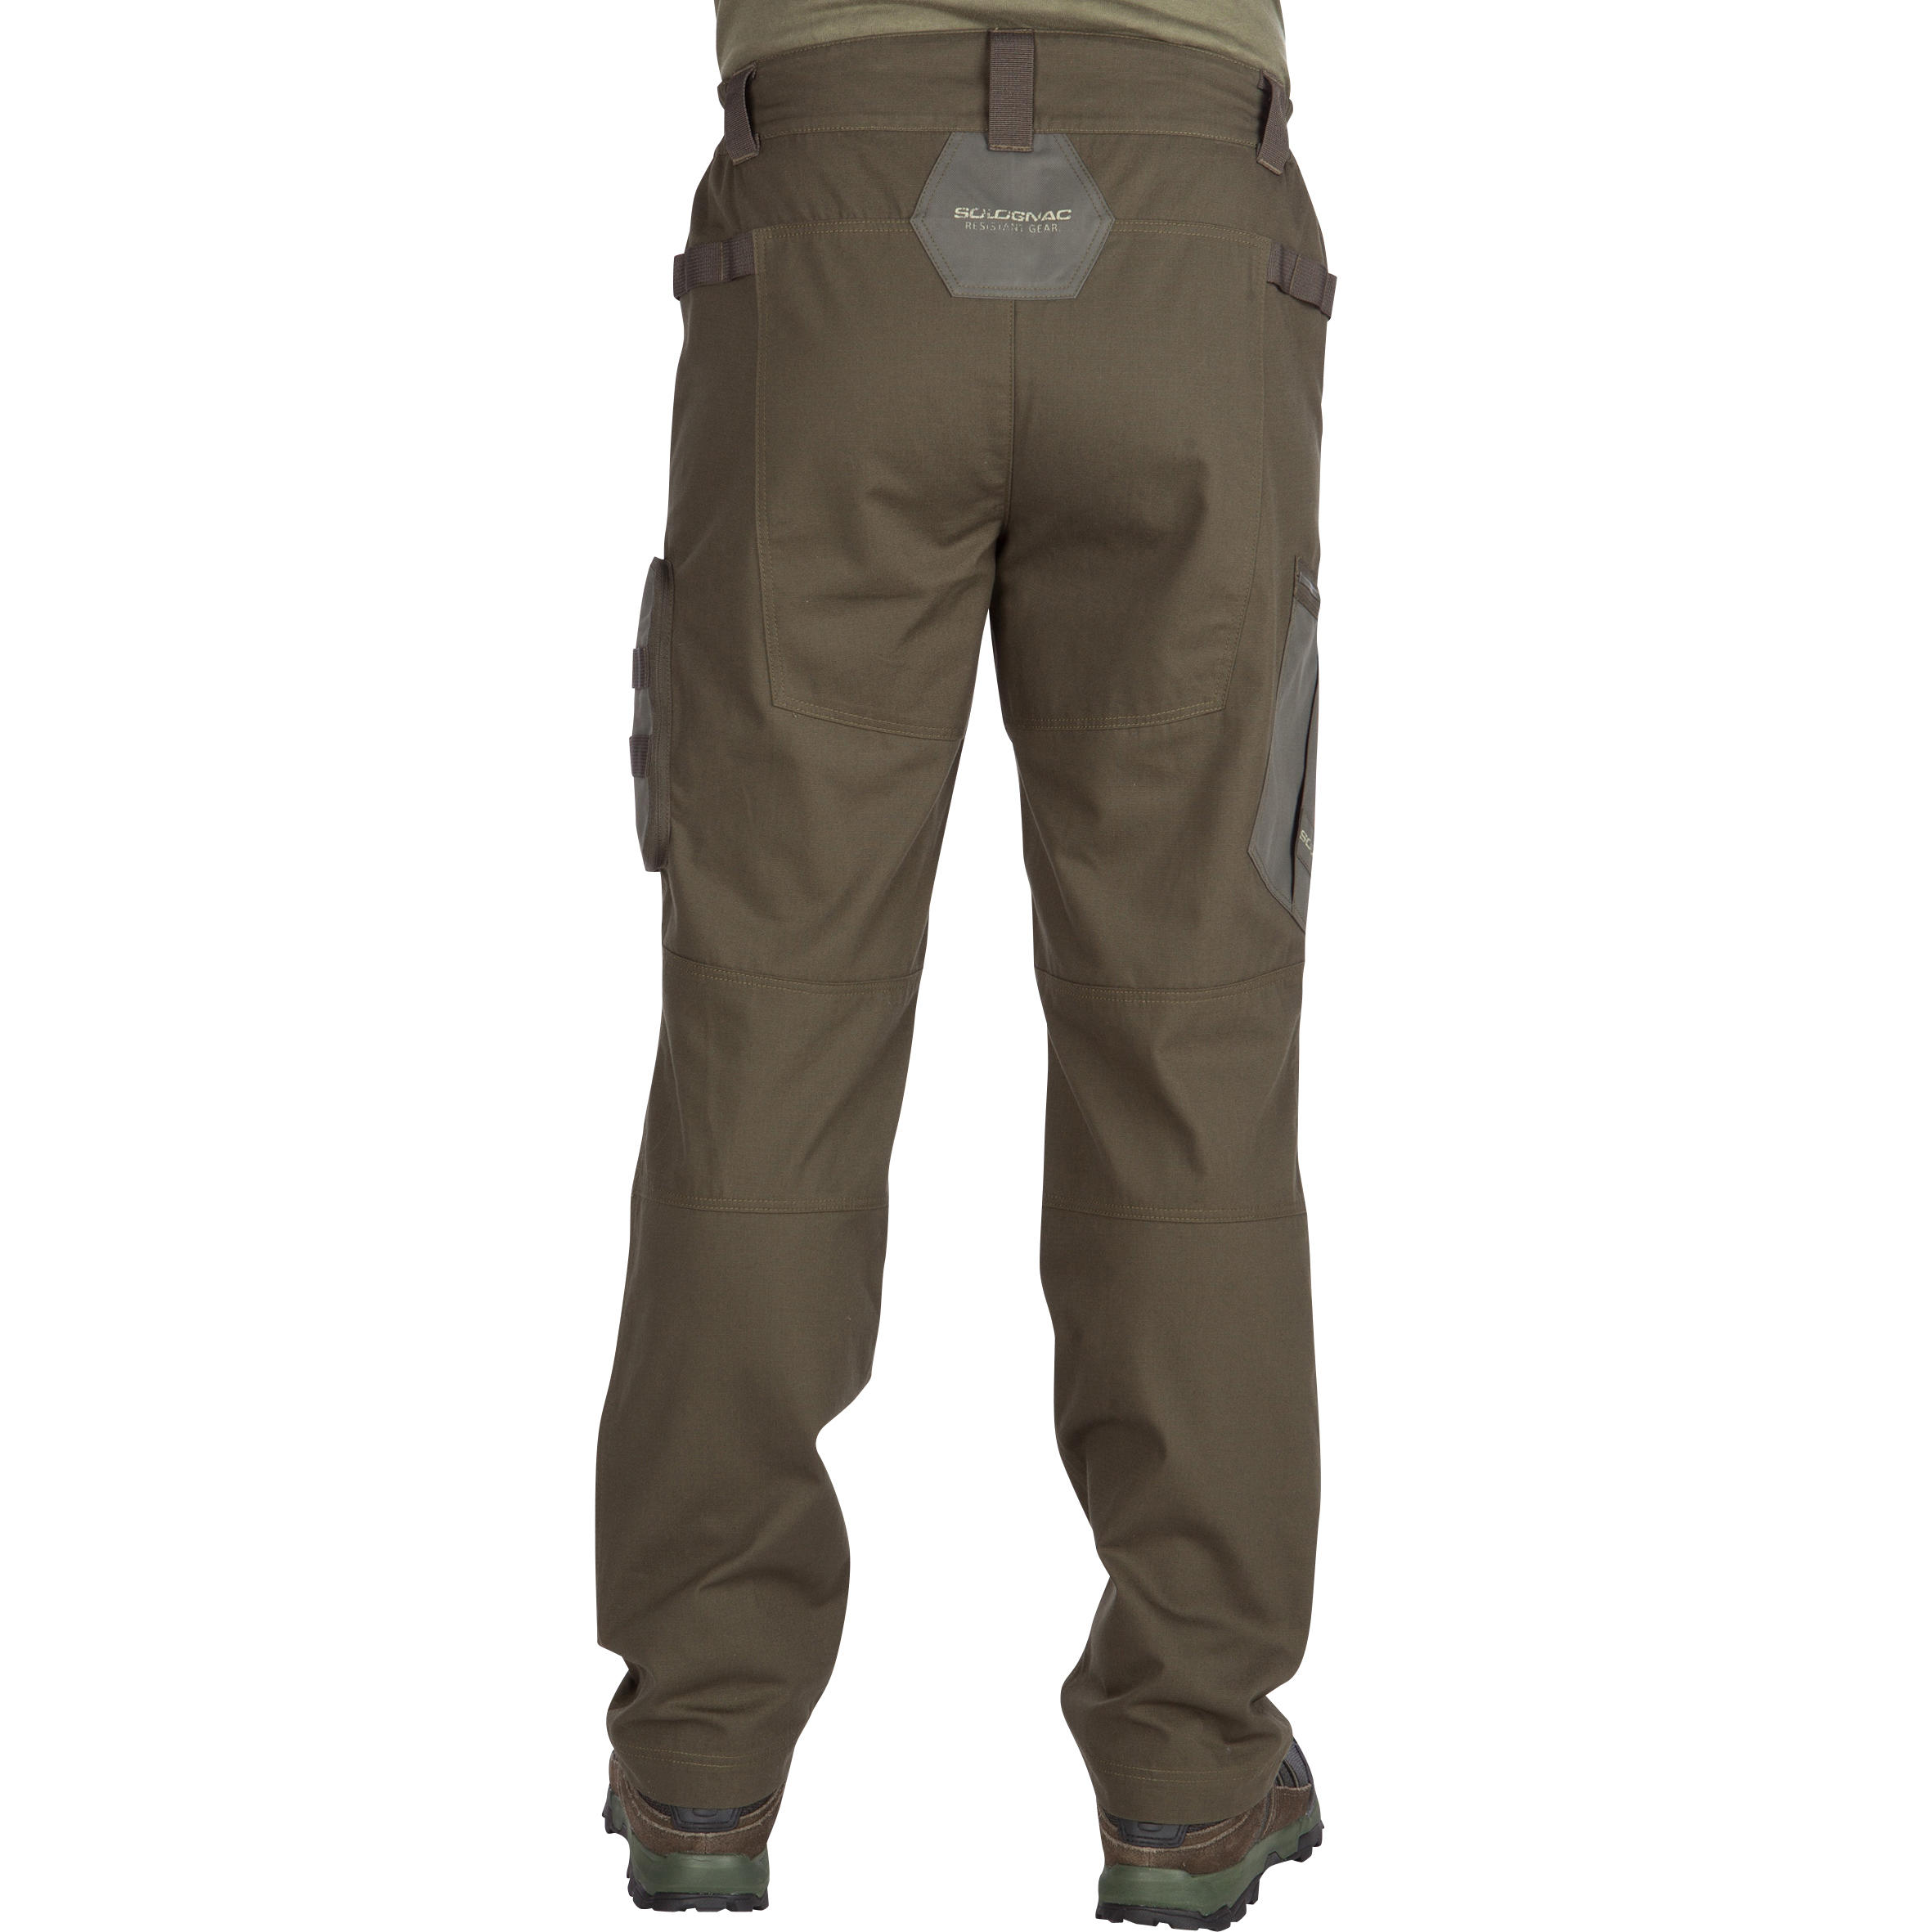 Low-waisted cargo trousers - Khaki green - Ladies | H&M IN